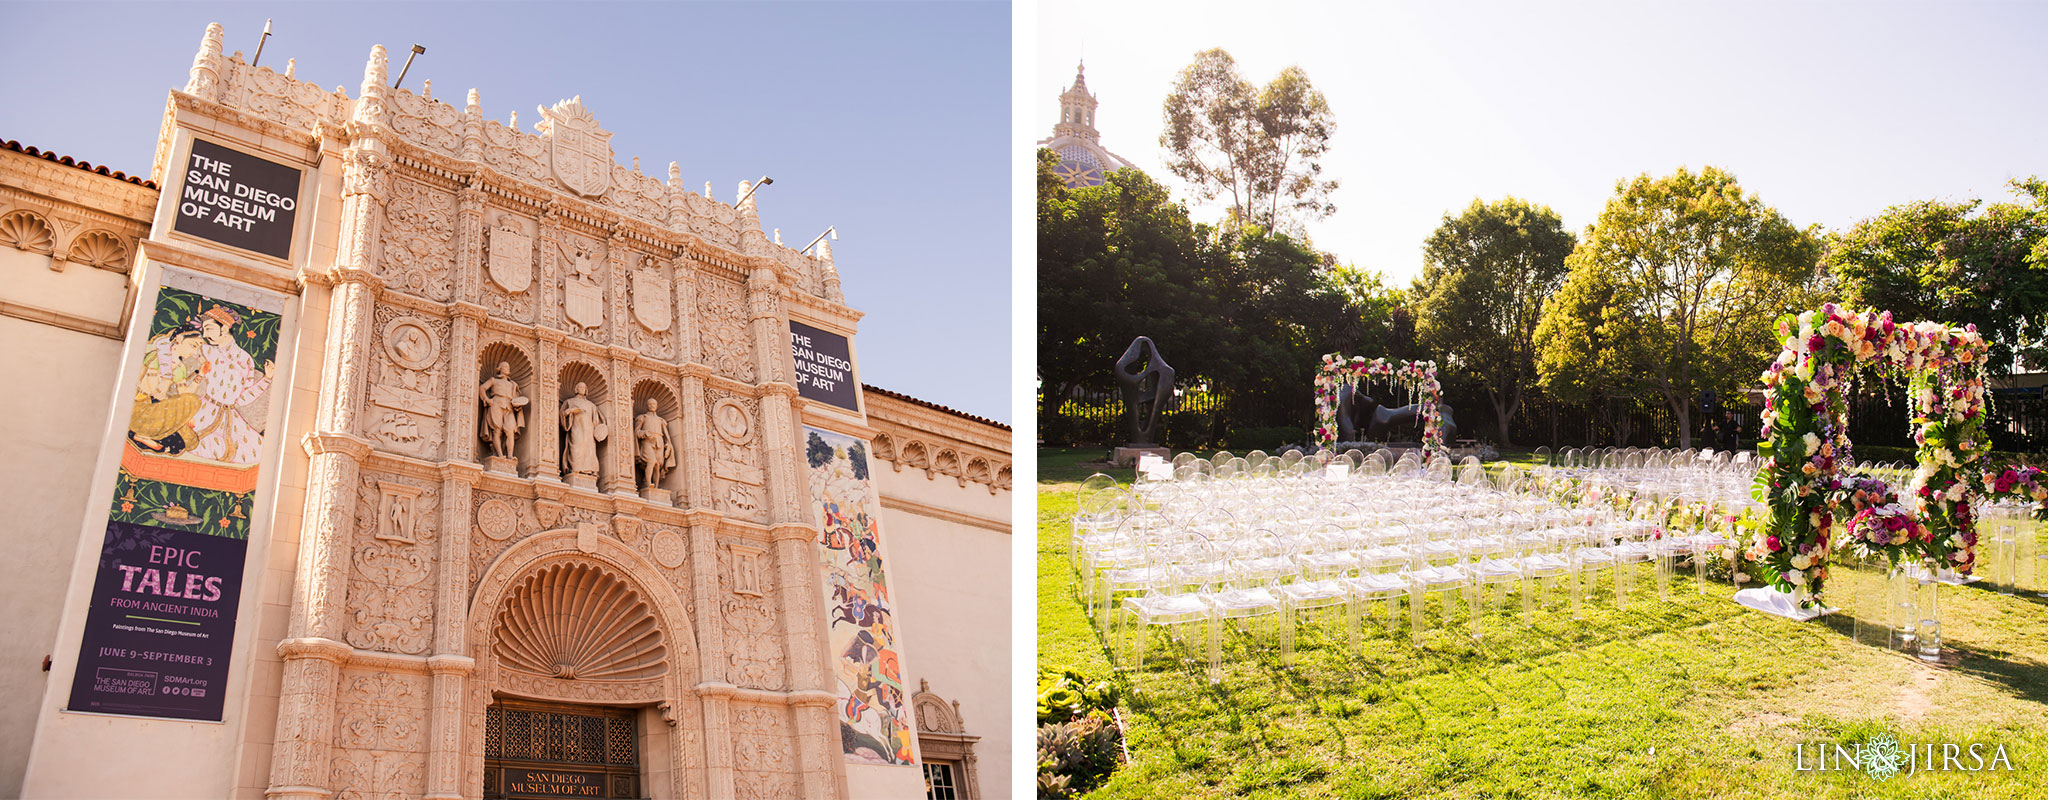 san diego museum of art architecture wedding ceremony photography